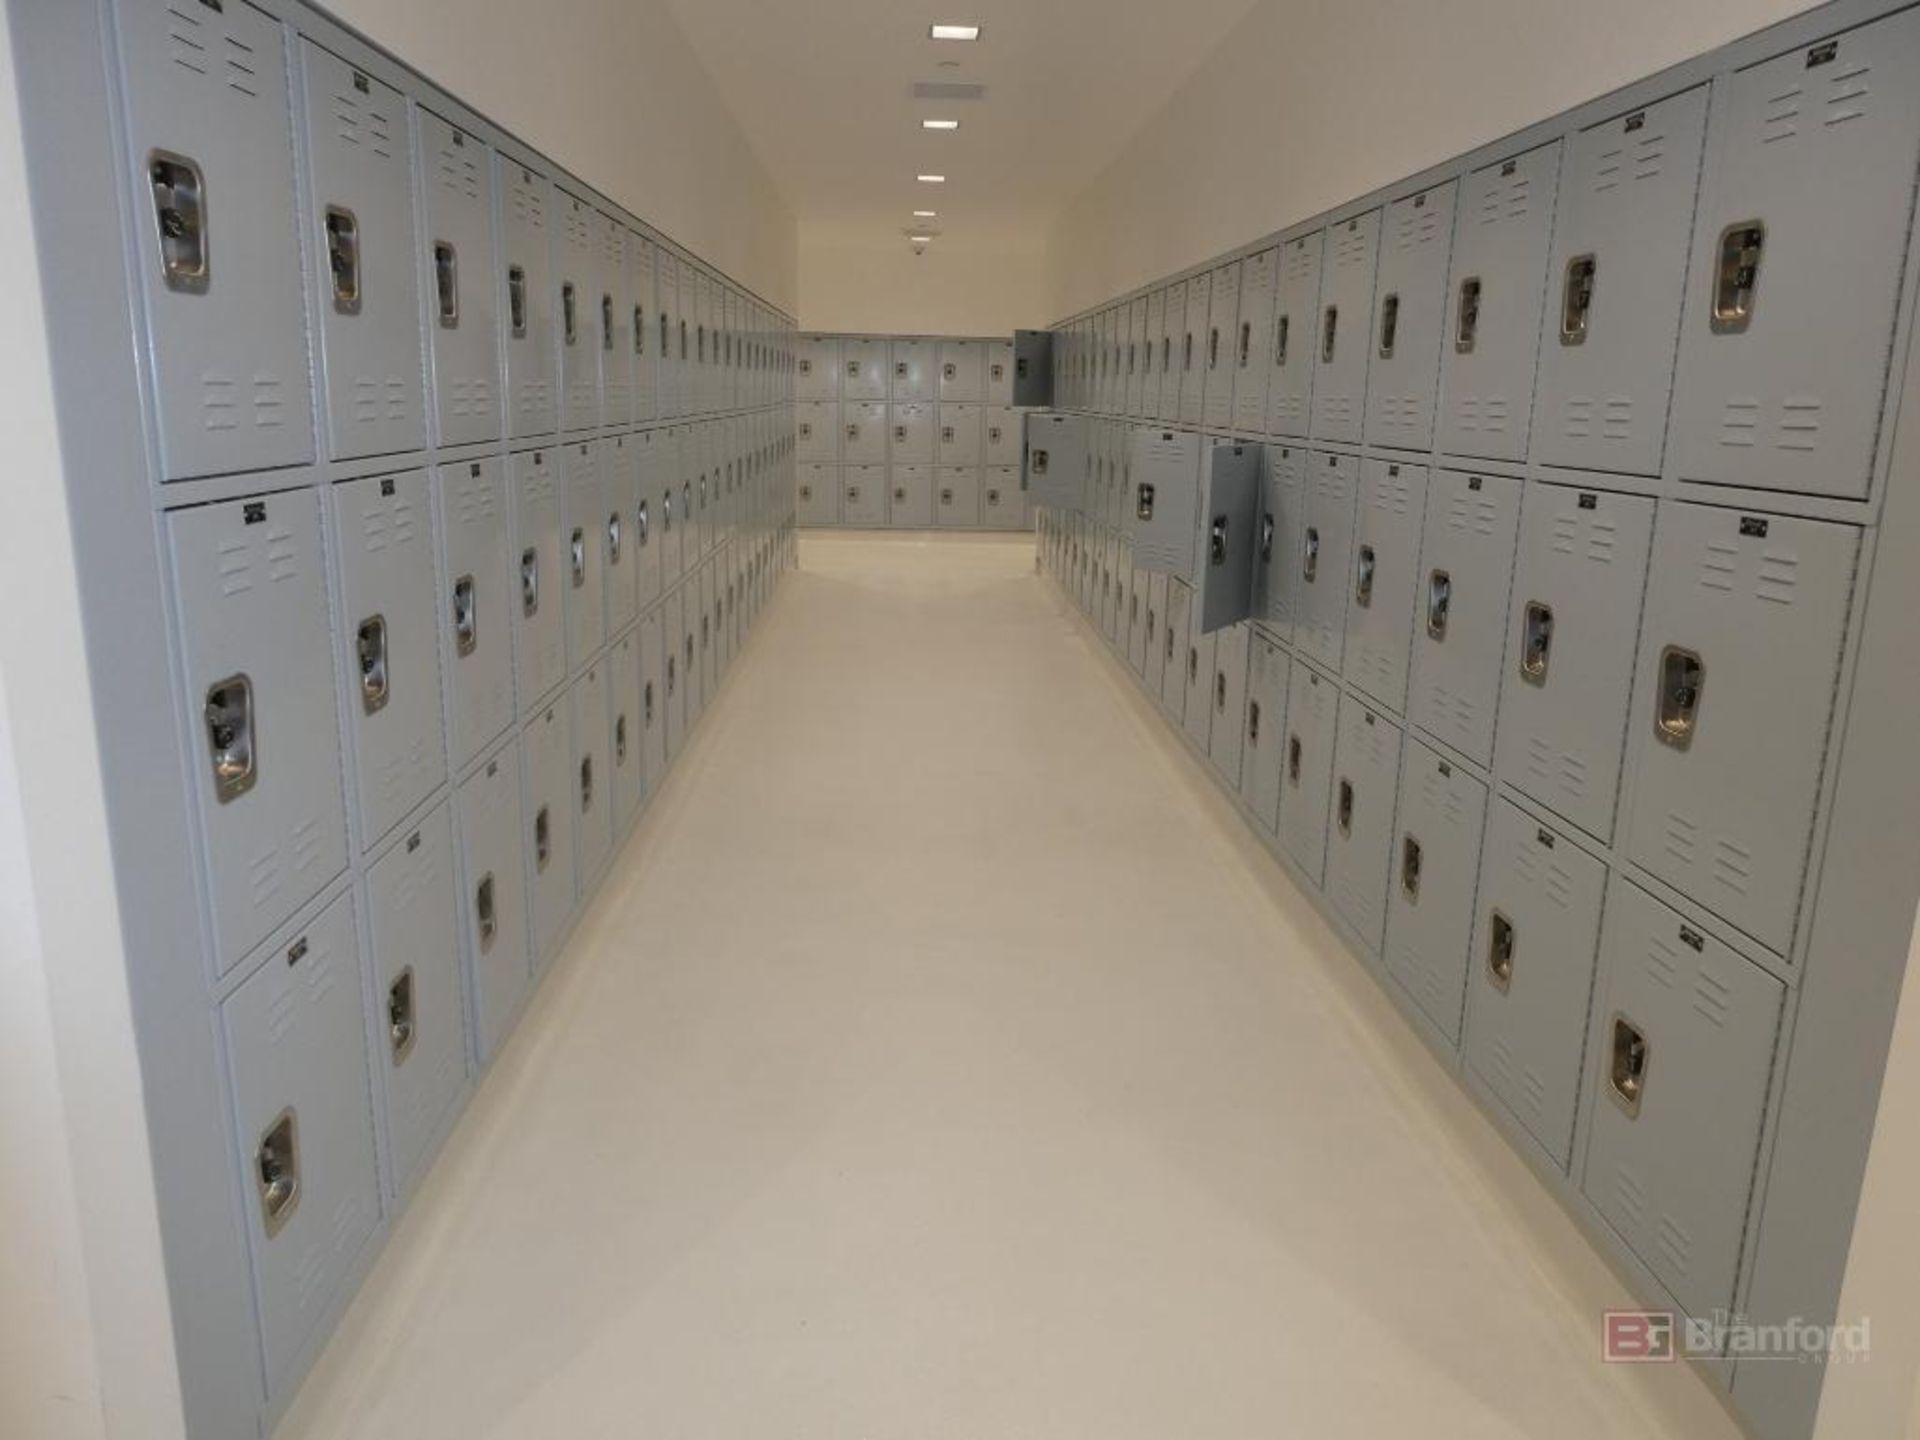 (612) Hallowell Lockers w/ Built-In Combination Lock - Image 5 of 6